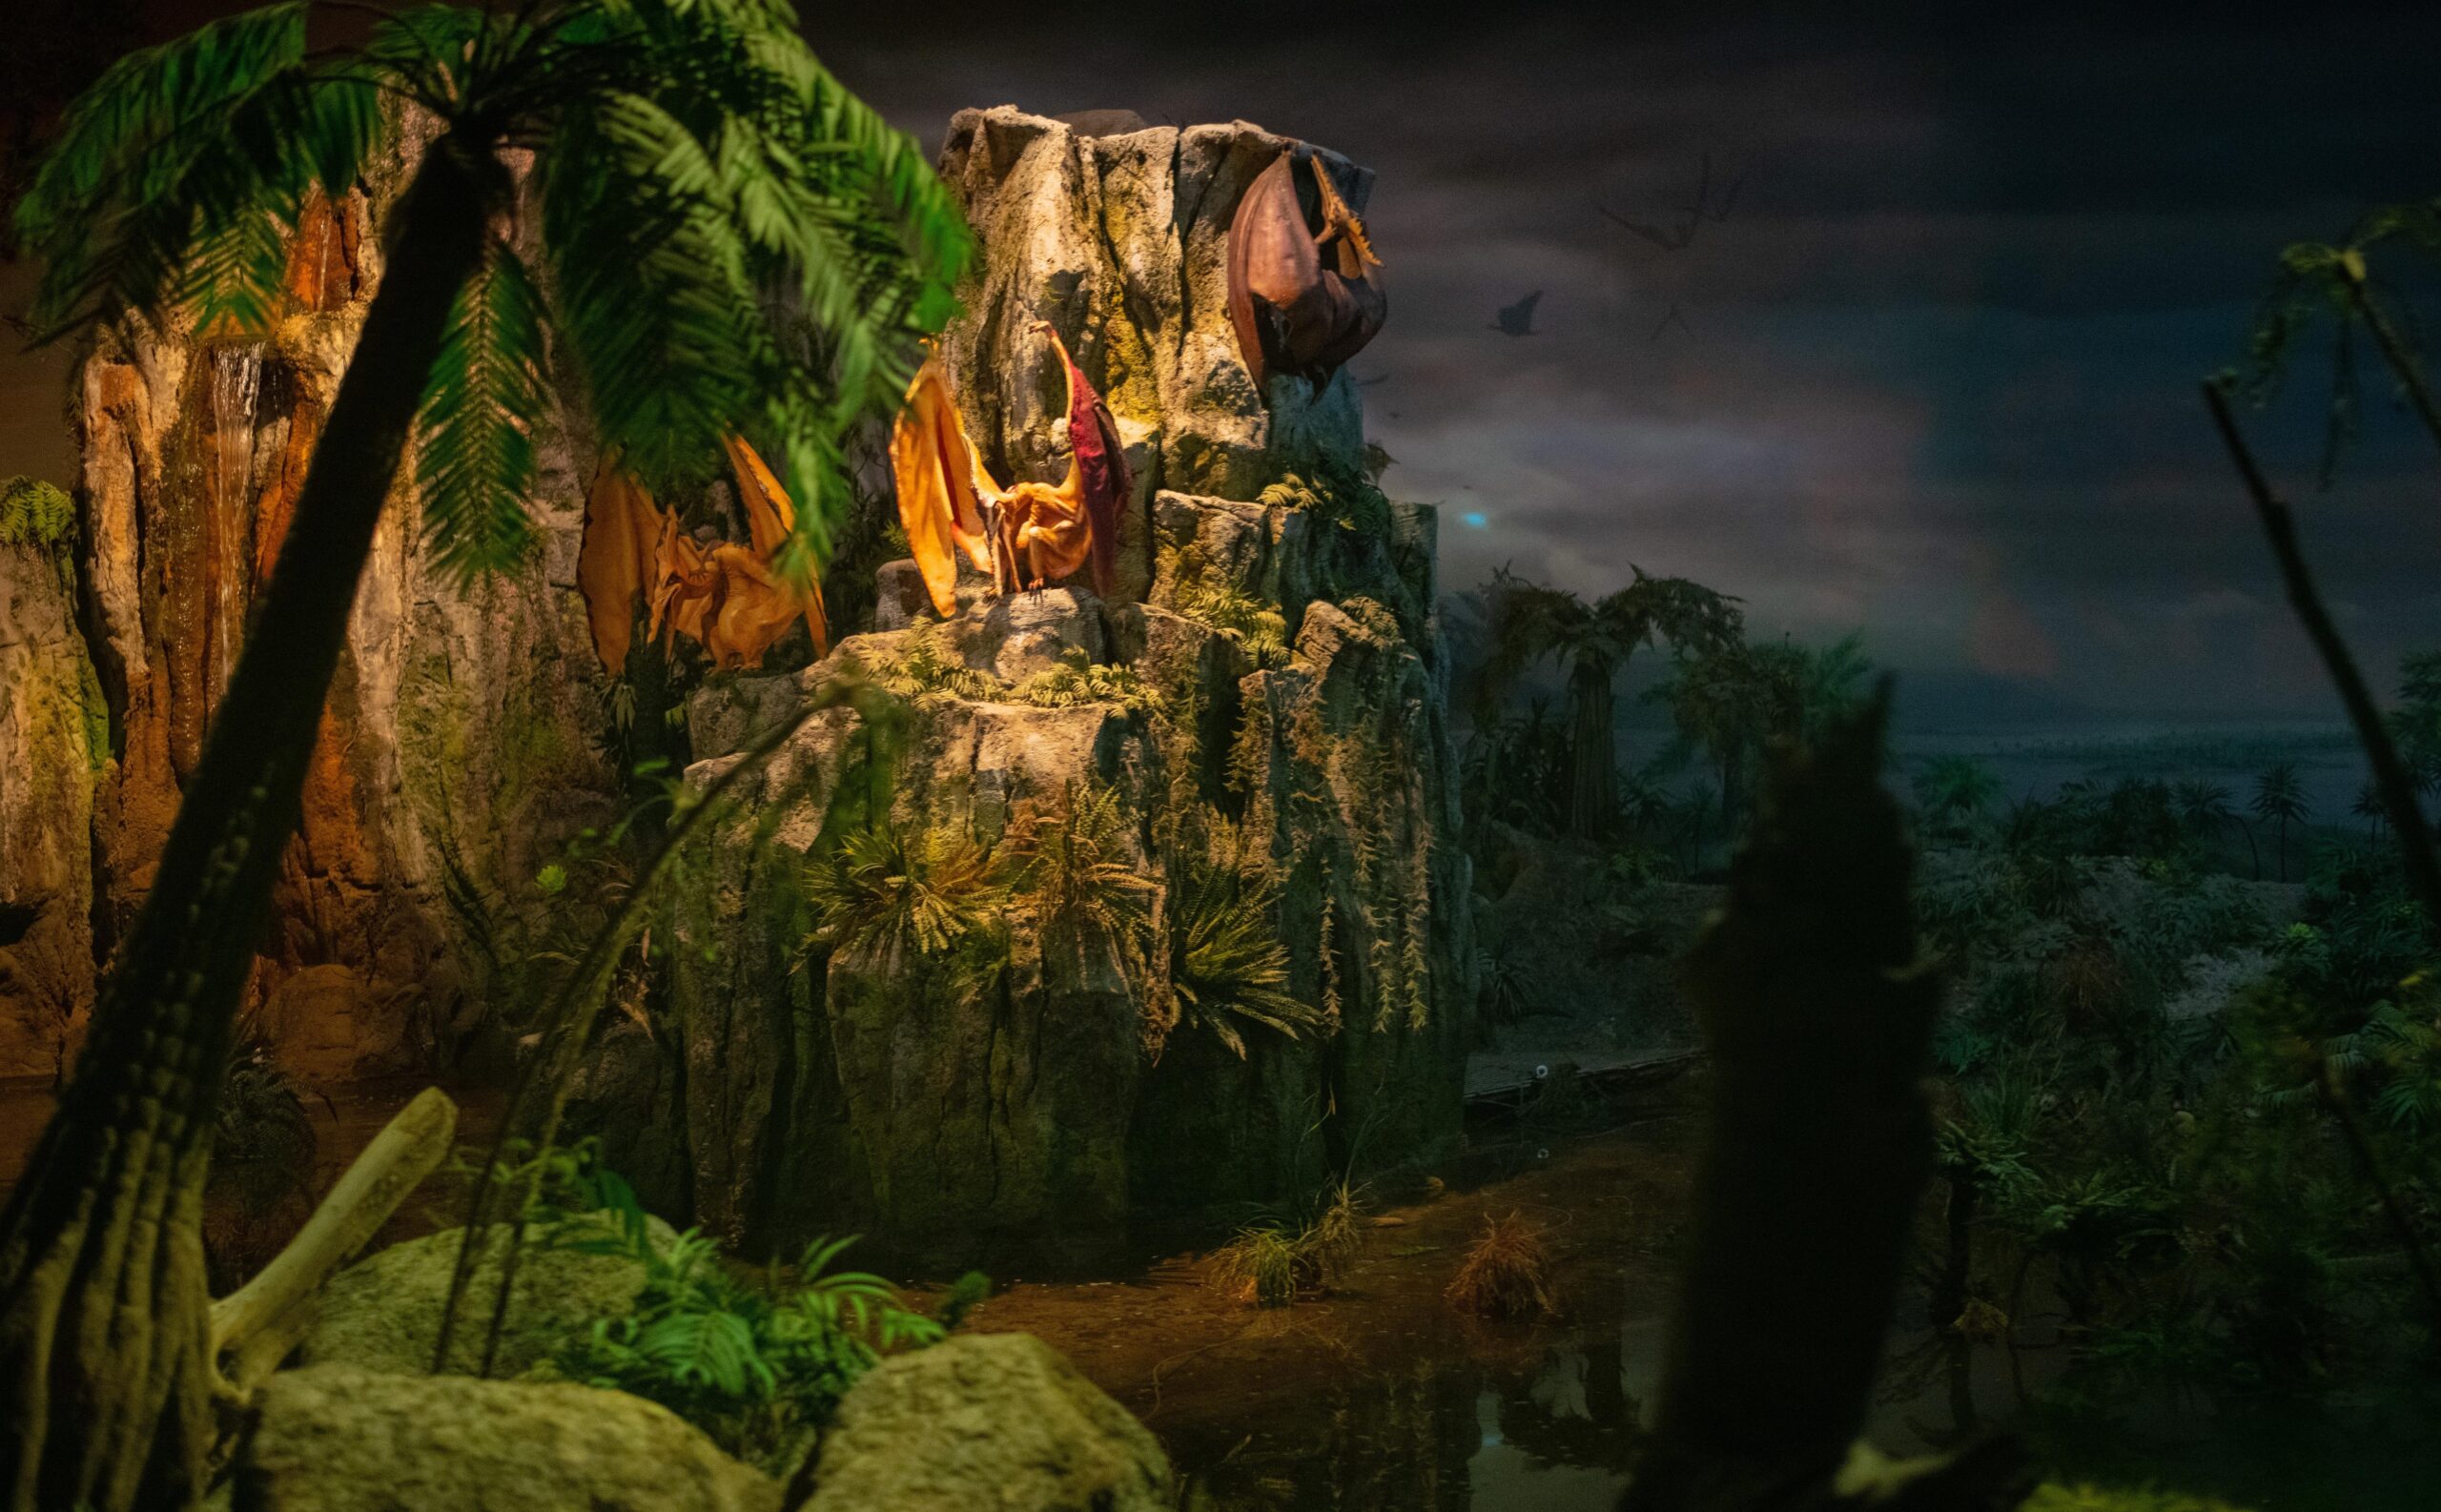 10 Things You Didn't Know About The Dinosaurs On The Disneyland Railroad